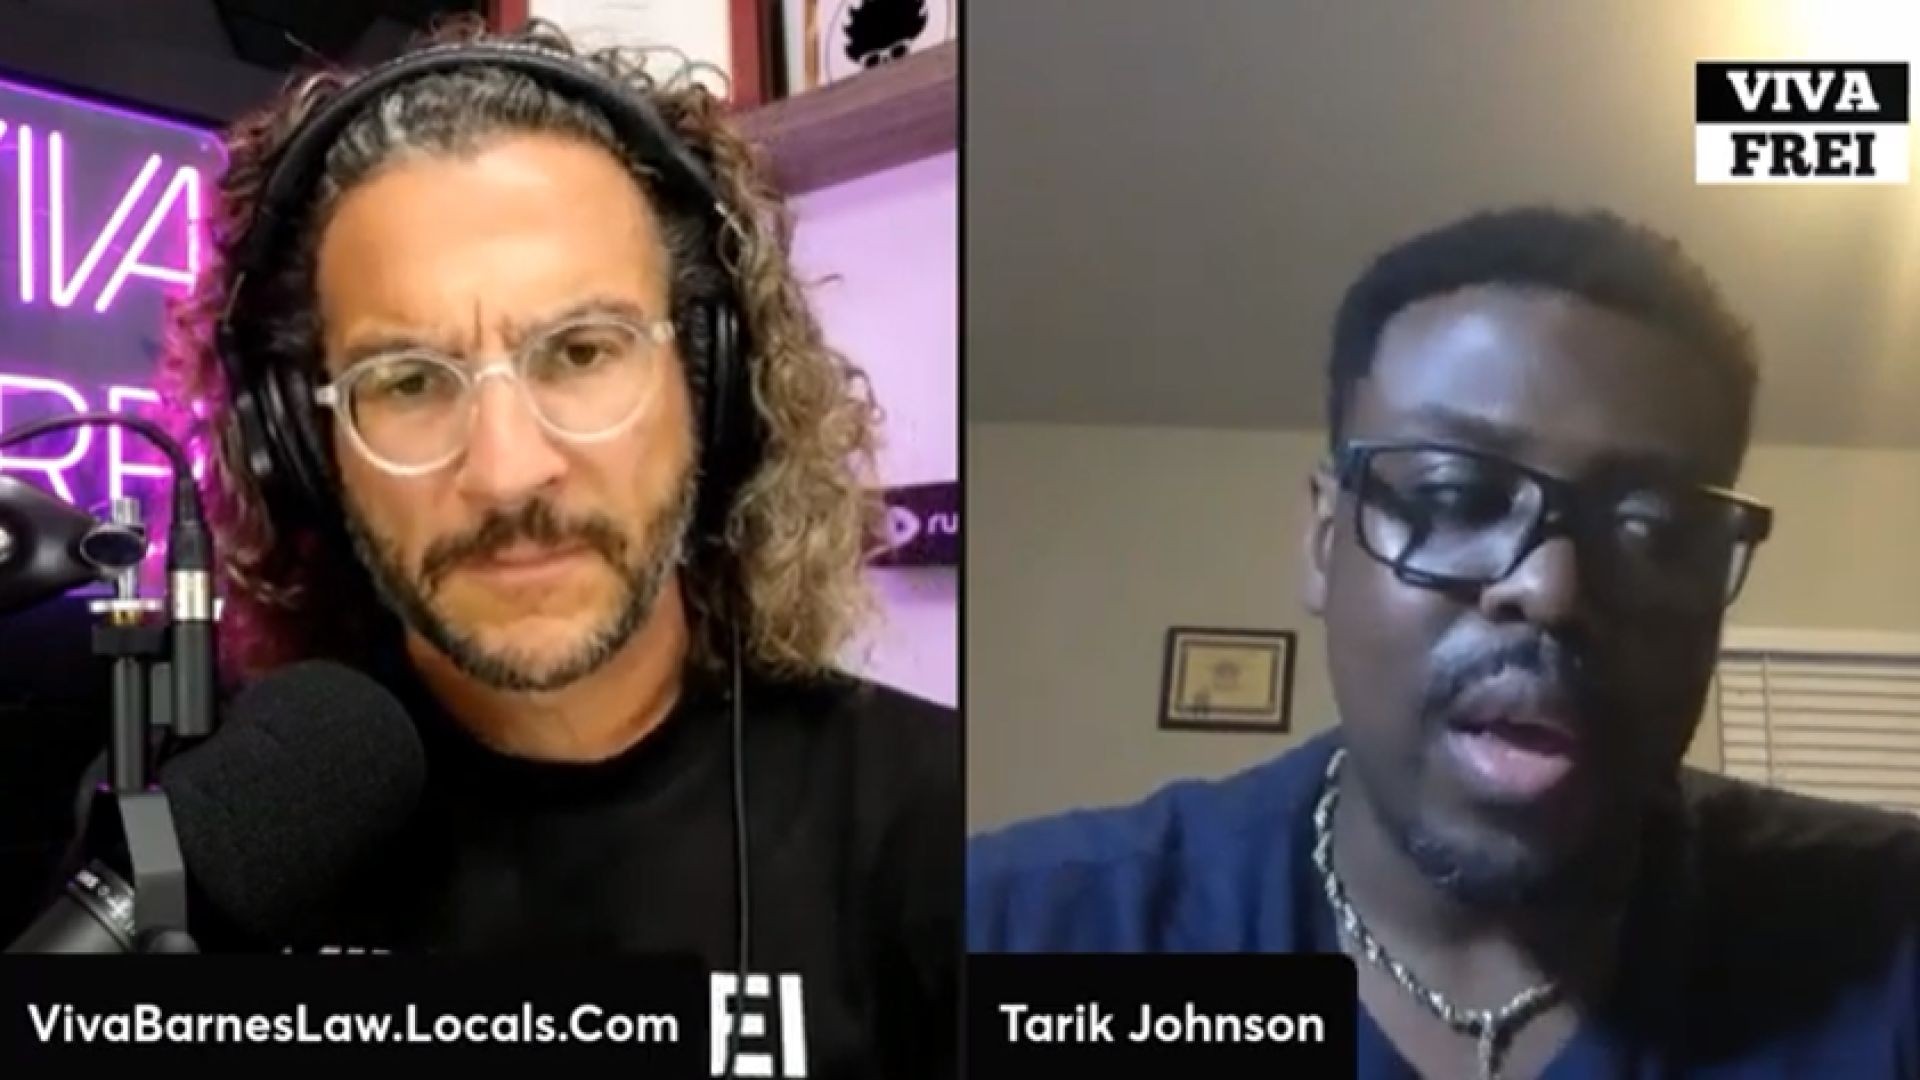 FORMER CAPITOL POLICE LIEUTENANT REVEALS JAN. 6 WAS A SET-UP! FULL INTERVIEW WITH TARIK JOHNSON